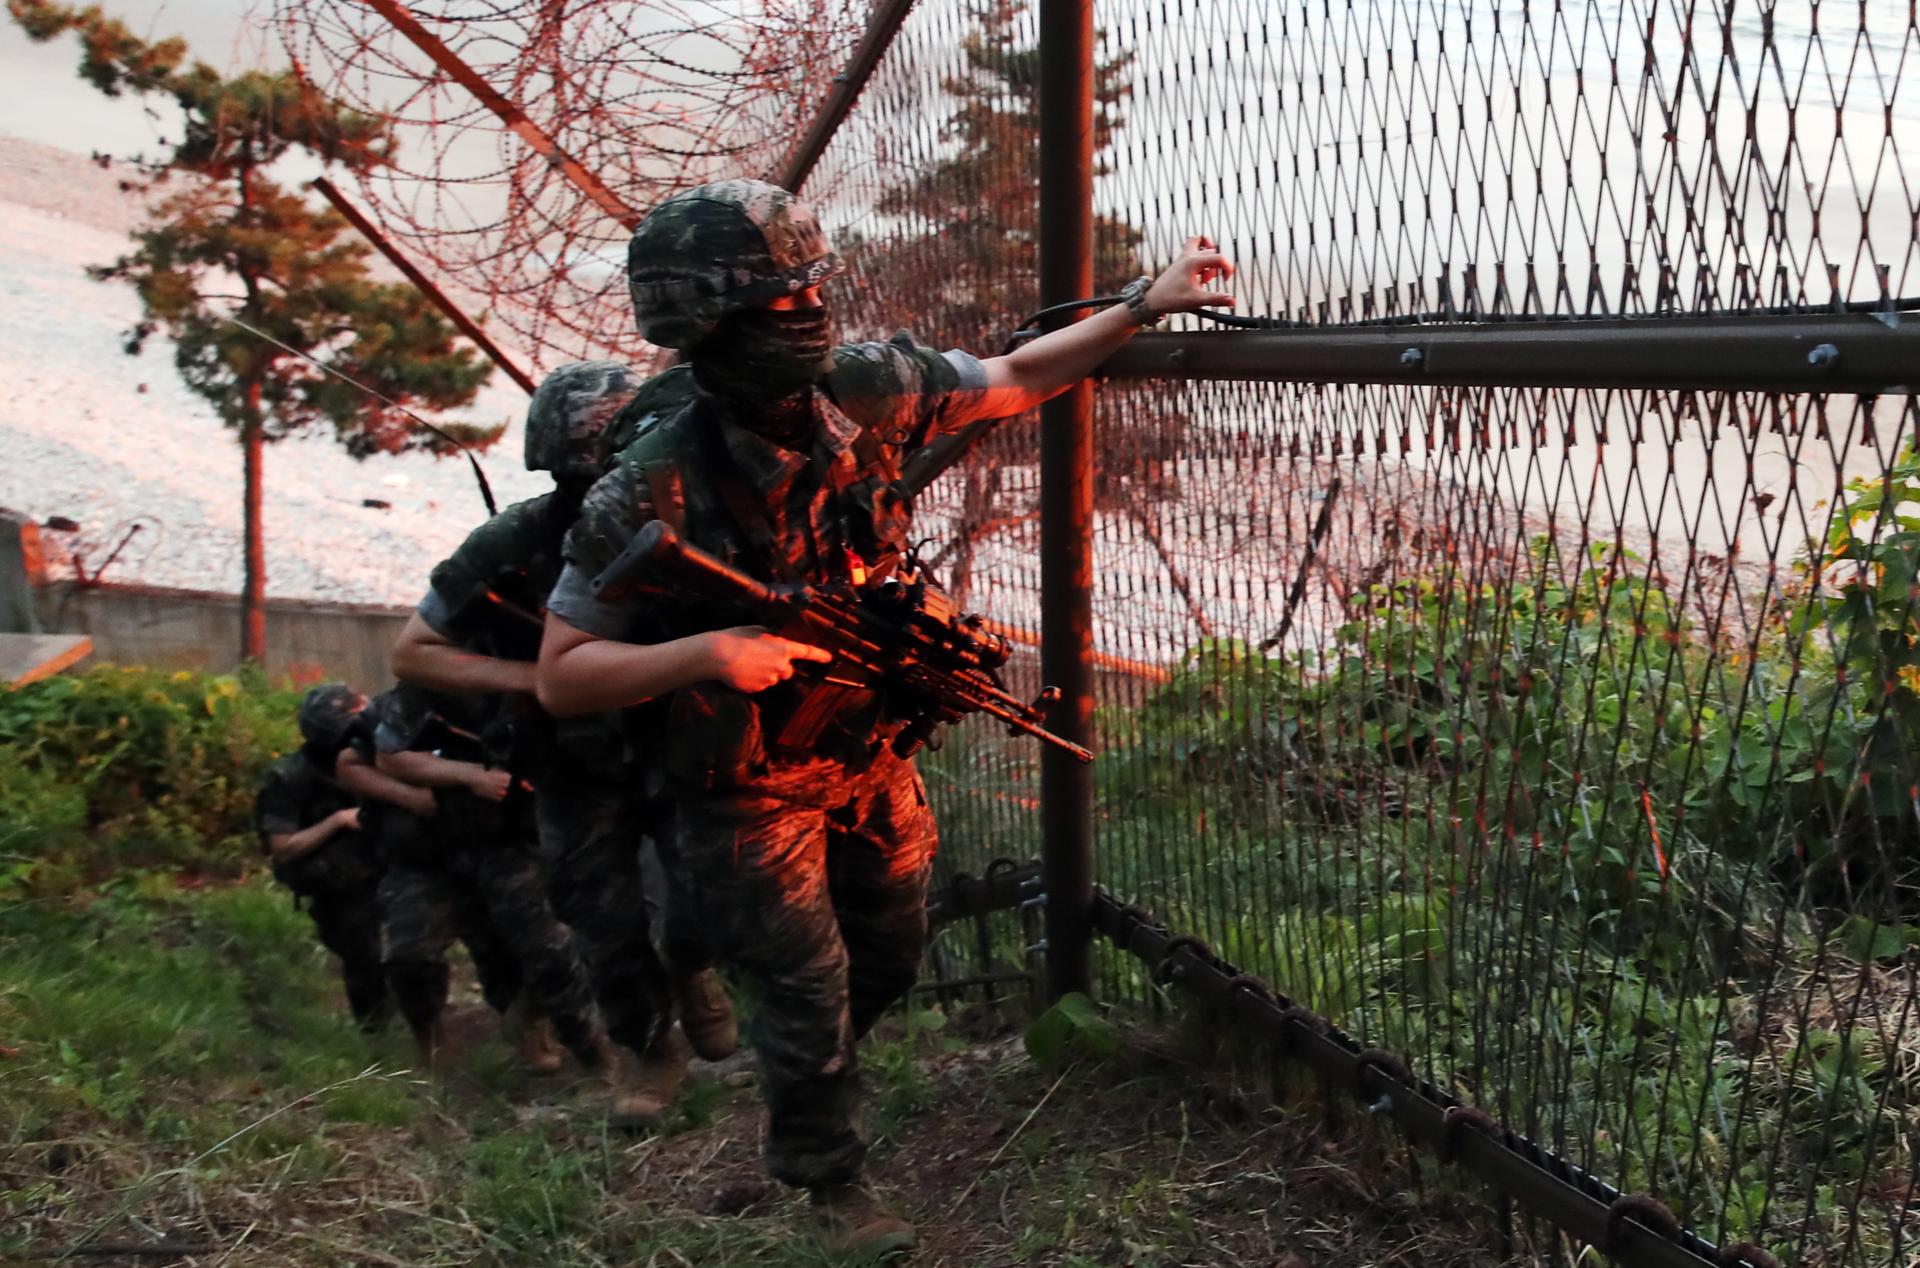 South Korean Marines patrol a perimeter fence of Yeonpyeong Island in the Yellow Sea just south of the Northern Limit Line of the inter-Korean maritime border, in South Korea, 16 June 2020. EFE-EPA FILE/YONHAP SOUTH KOREA OUT